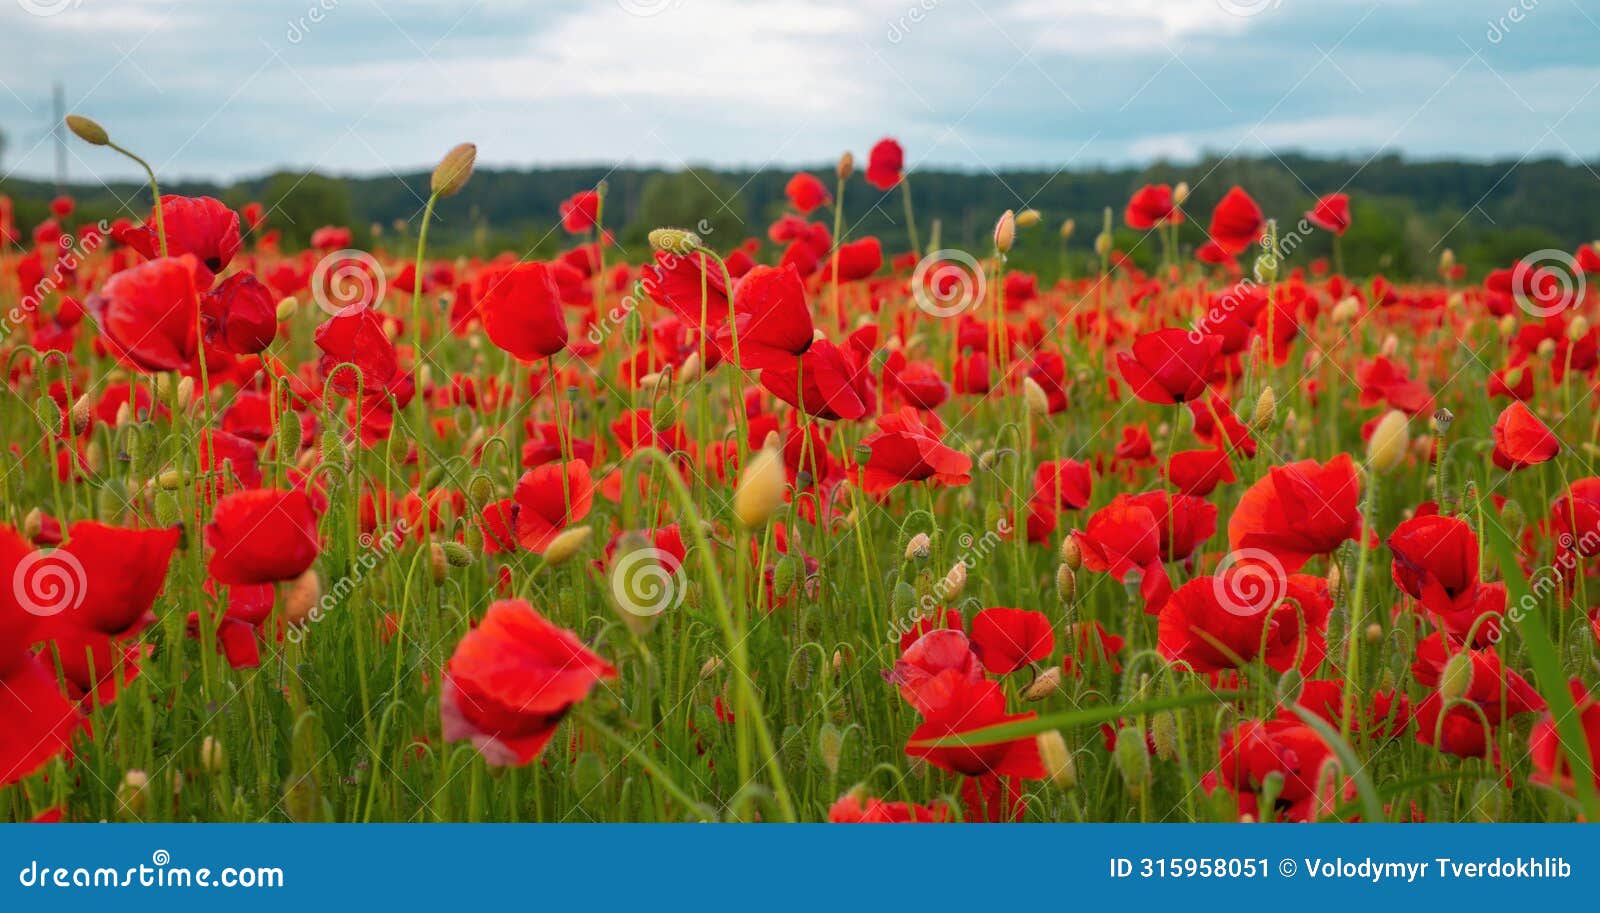 flowers red poppies blossom on wild field. anzac dat. remembrance day. red poppy flower posters, banner, header for